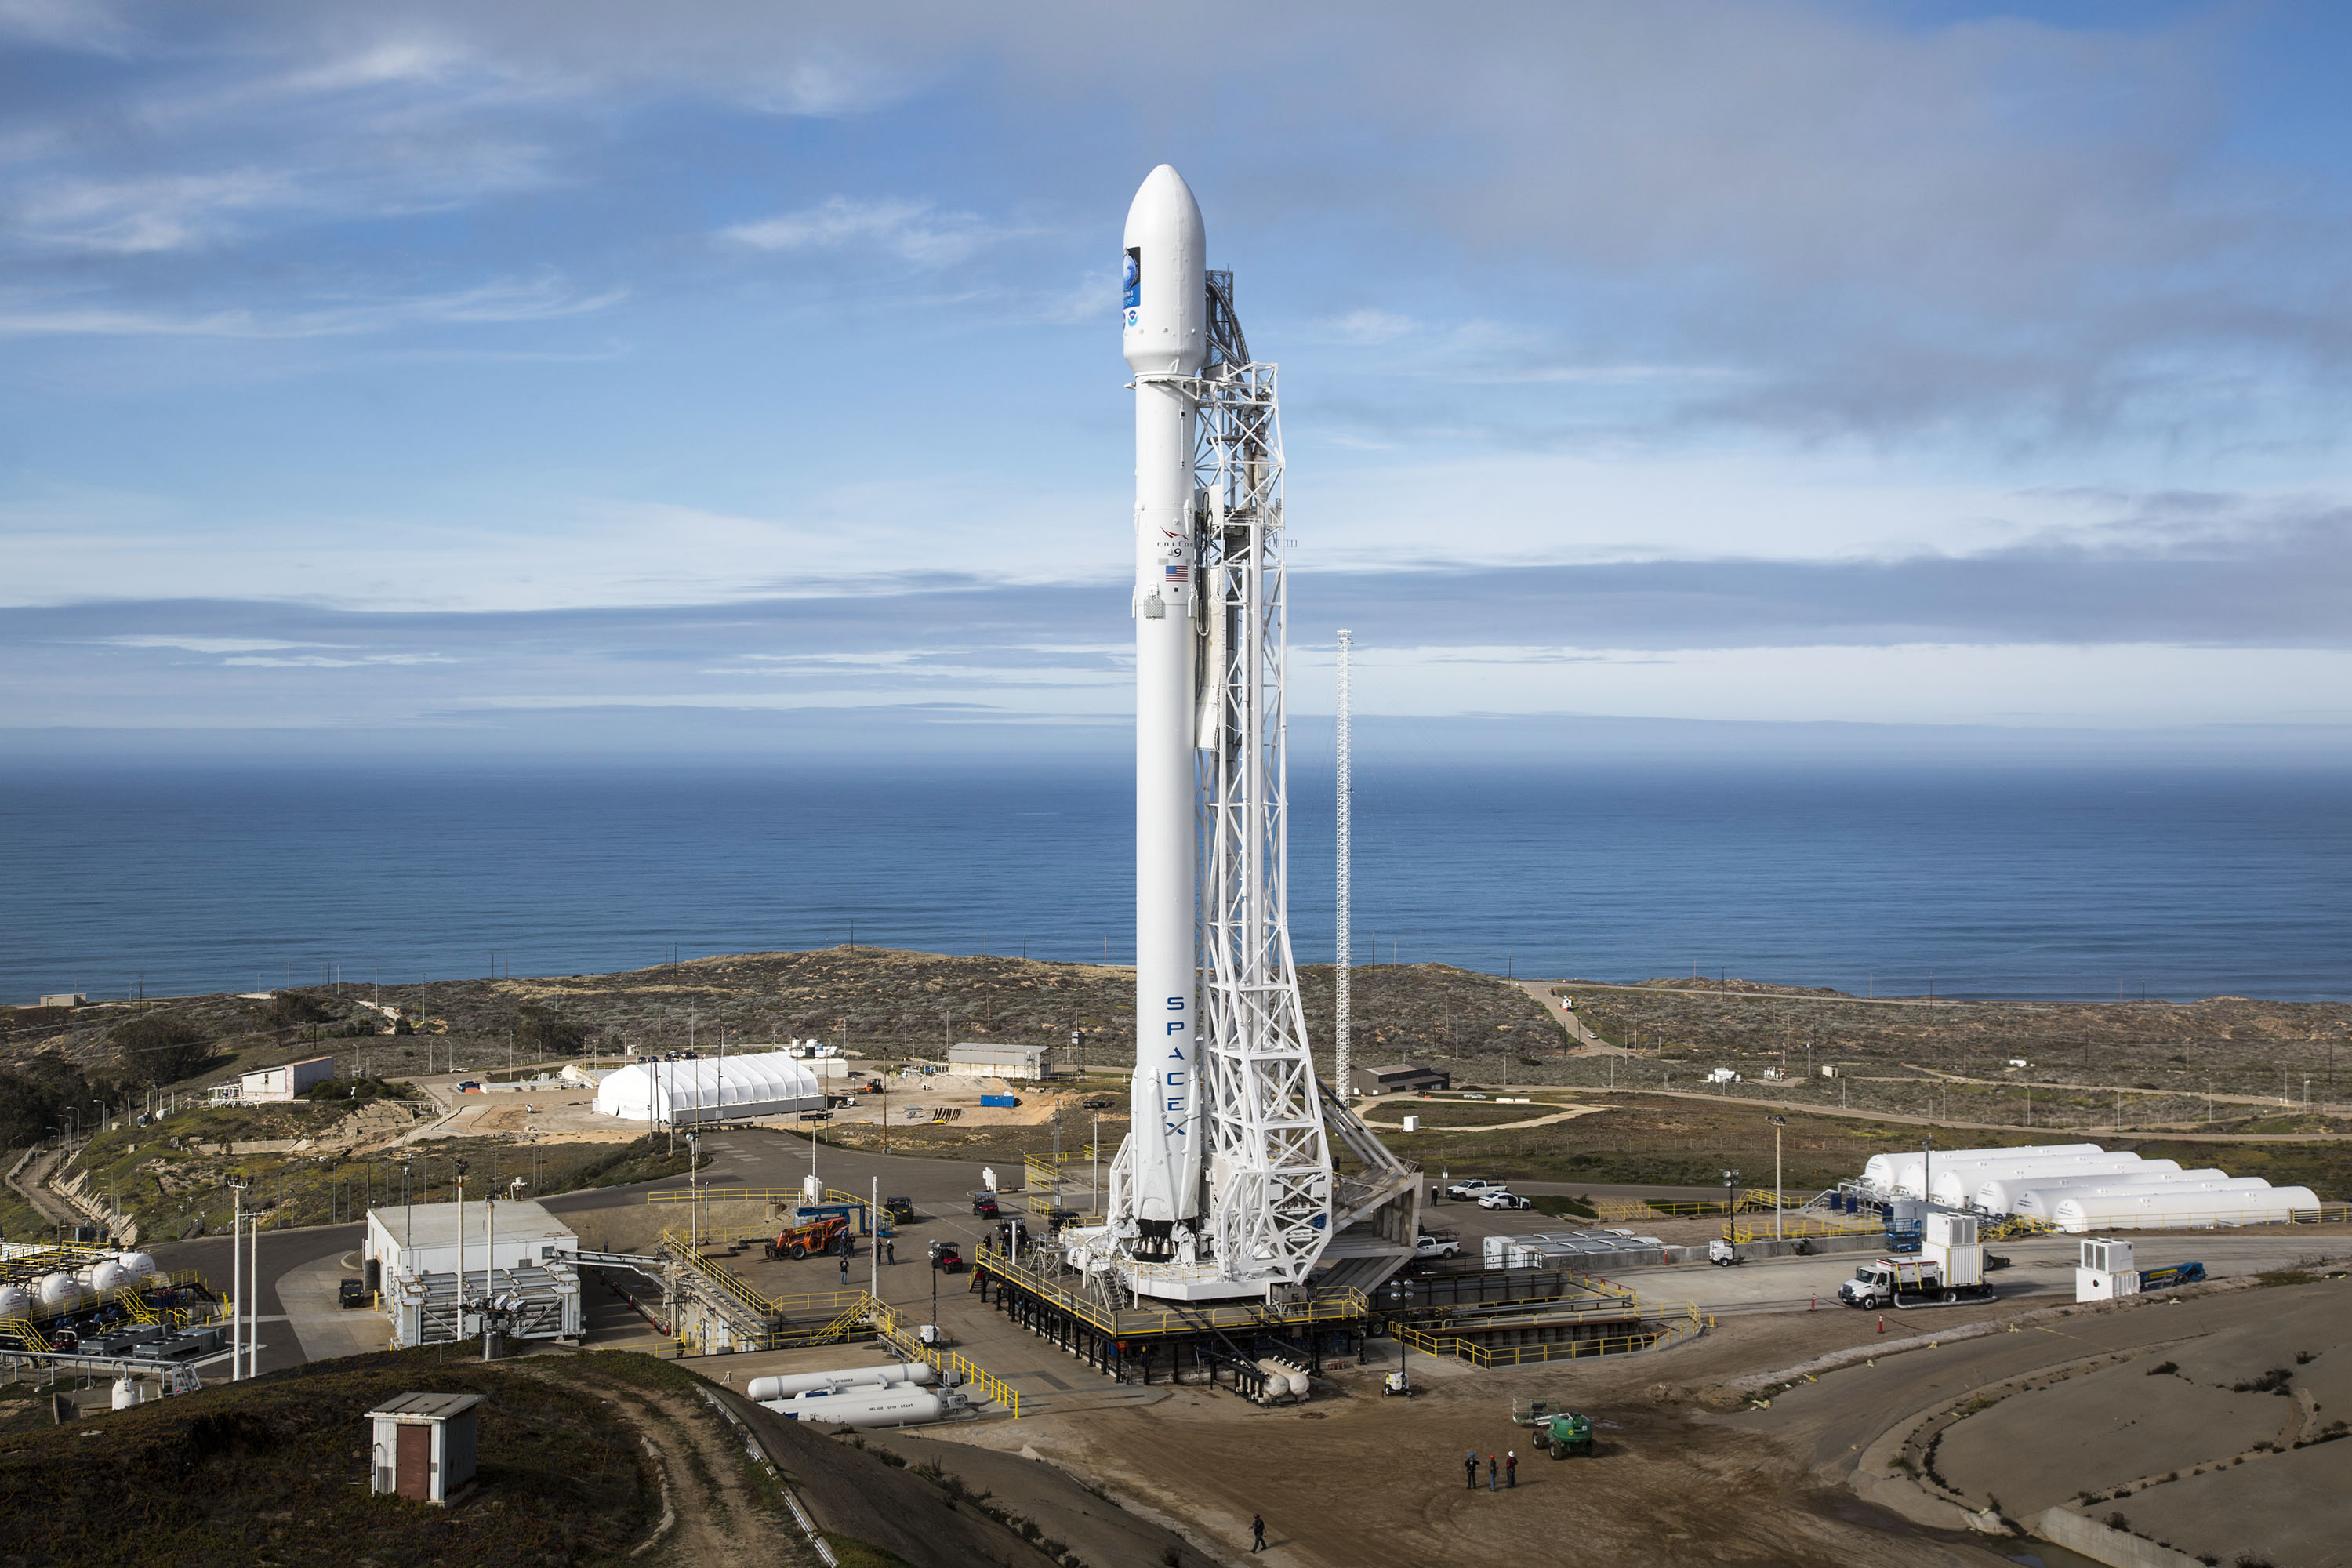 Source : SpaceX (2016, January 16). Falcon 9 vertical at Vandenberg Air Force Base. wikimedia commons. https://commons.wikimedia.org/w/index.php?curid=64851825